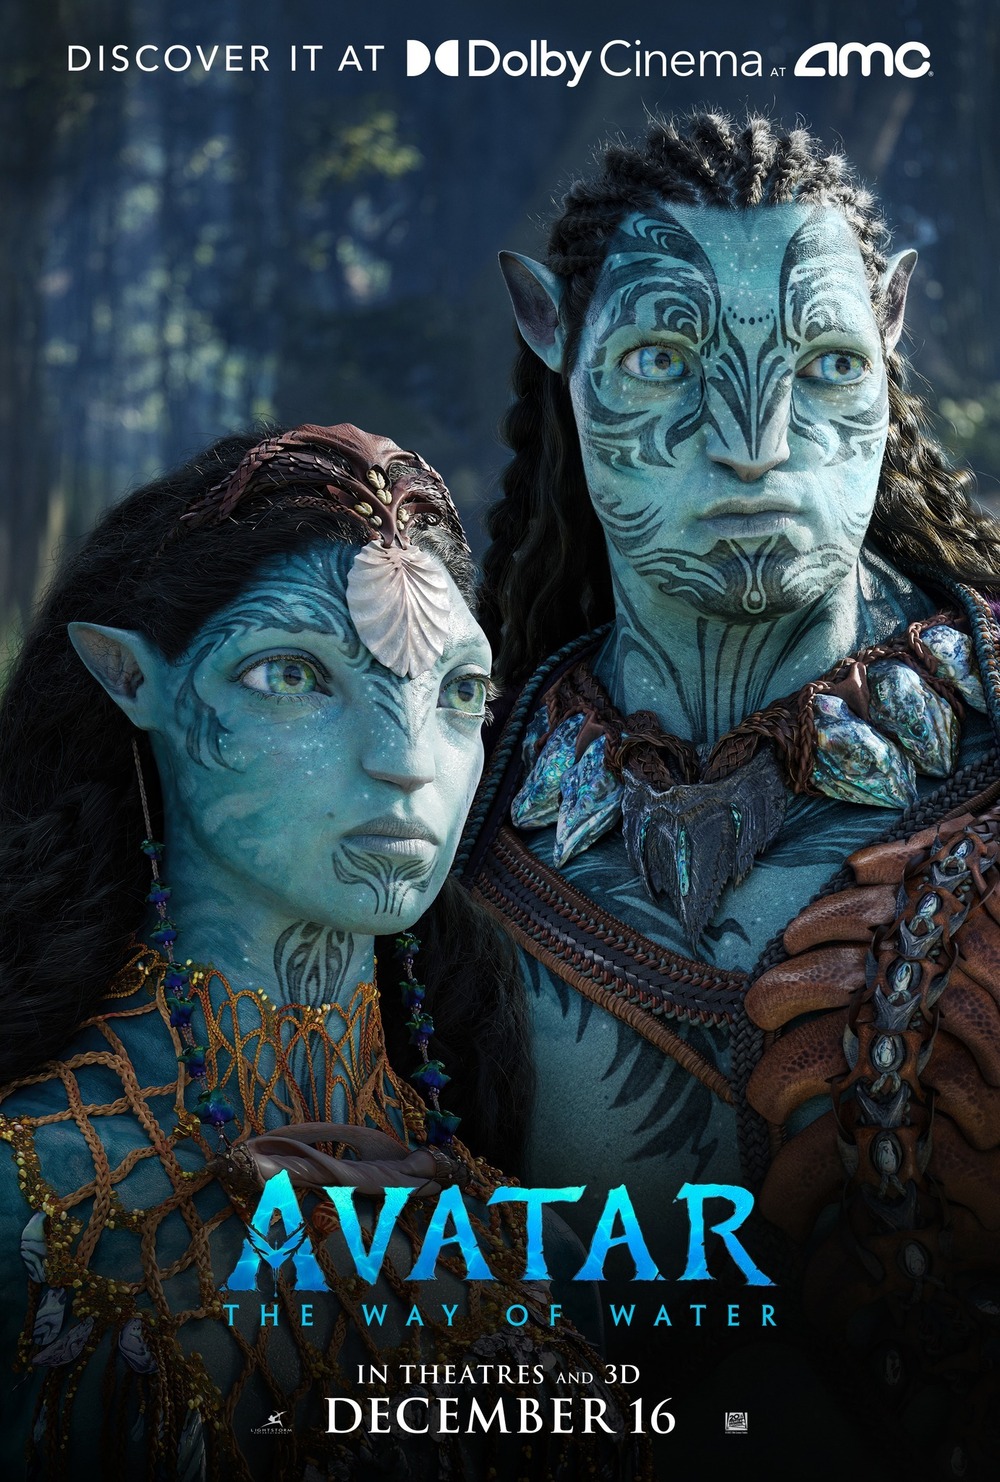 Time To Return To Pandora Once Again With Avatar The Way of Water Watch  Trailer